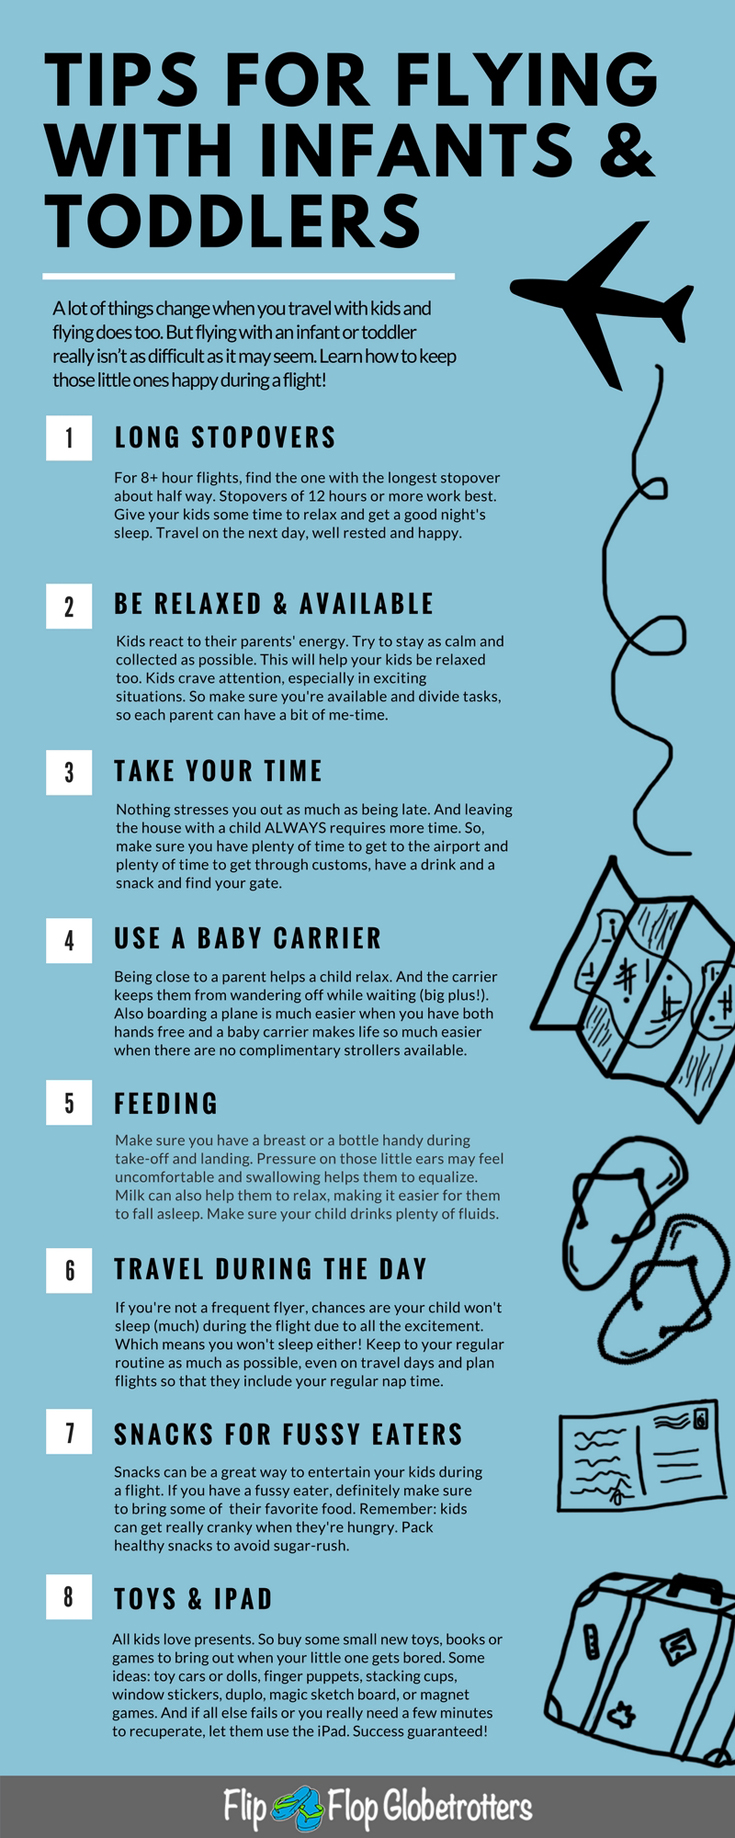 Tried and tested tips for flying with kids | Strategies for making flights with infants and toddlers more enjoyable, by family travel blog FlipFlopGlobetrotters.com | Flying with kids | flying with toddlers | flying with infants | tips for flying with kids | flying with a toddler | entertaining toddlers on a plane | flying tips | flying tips for kids | flying with a child